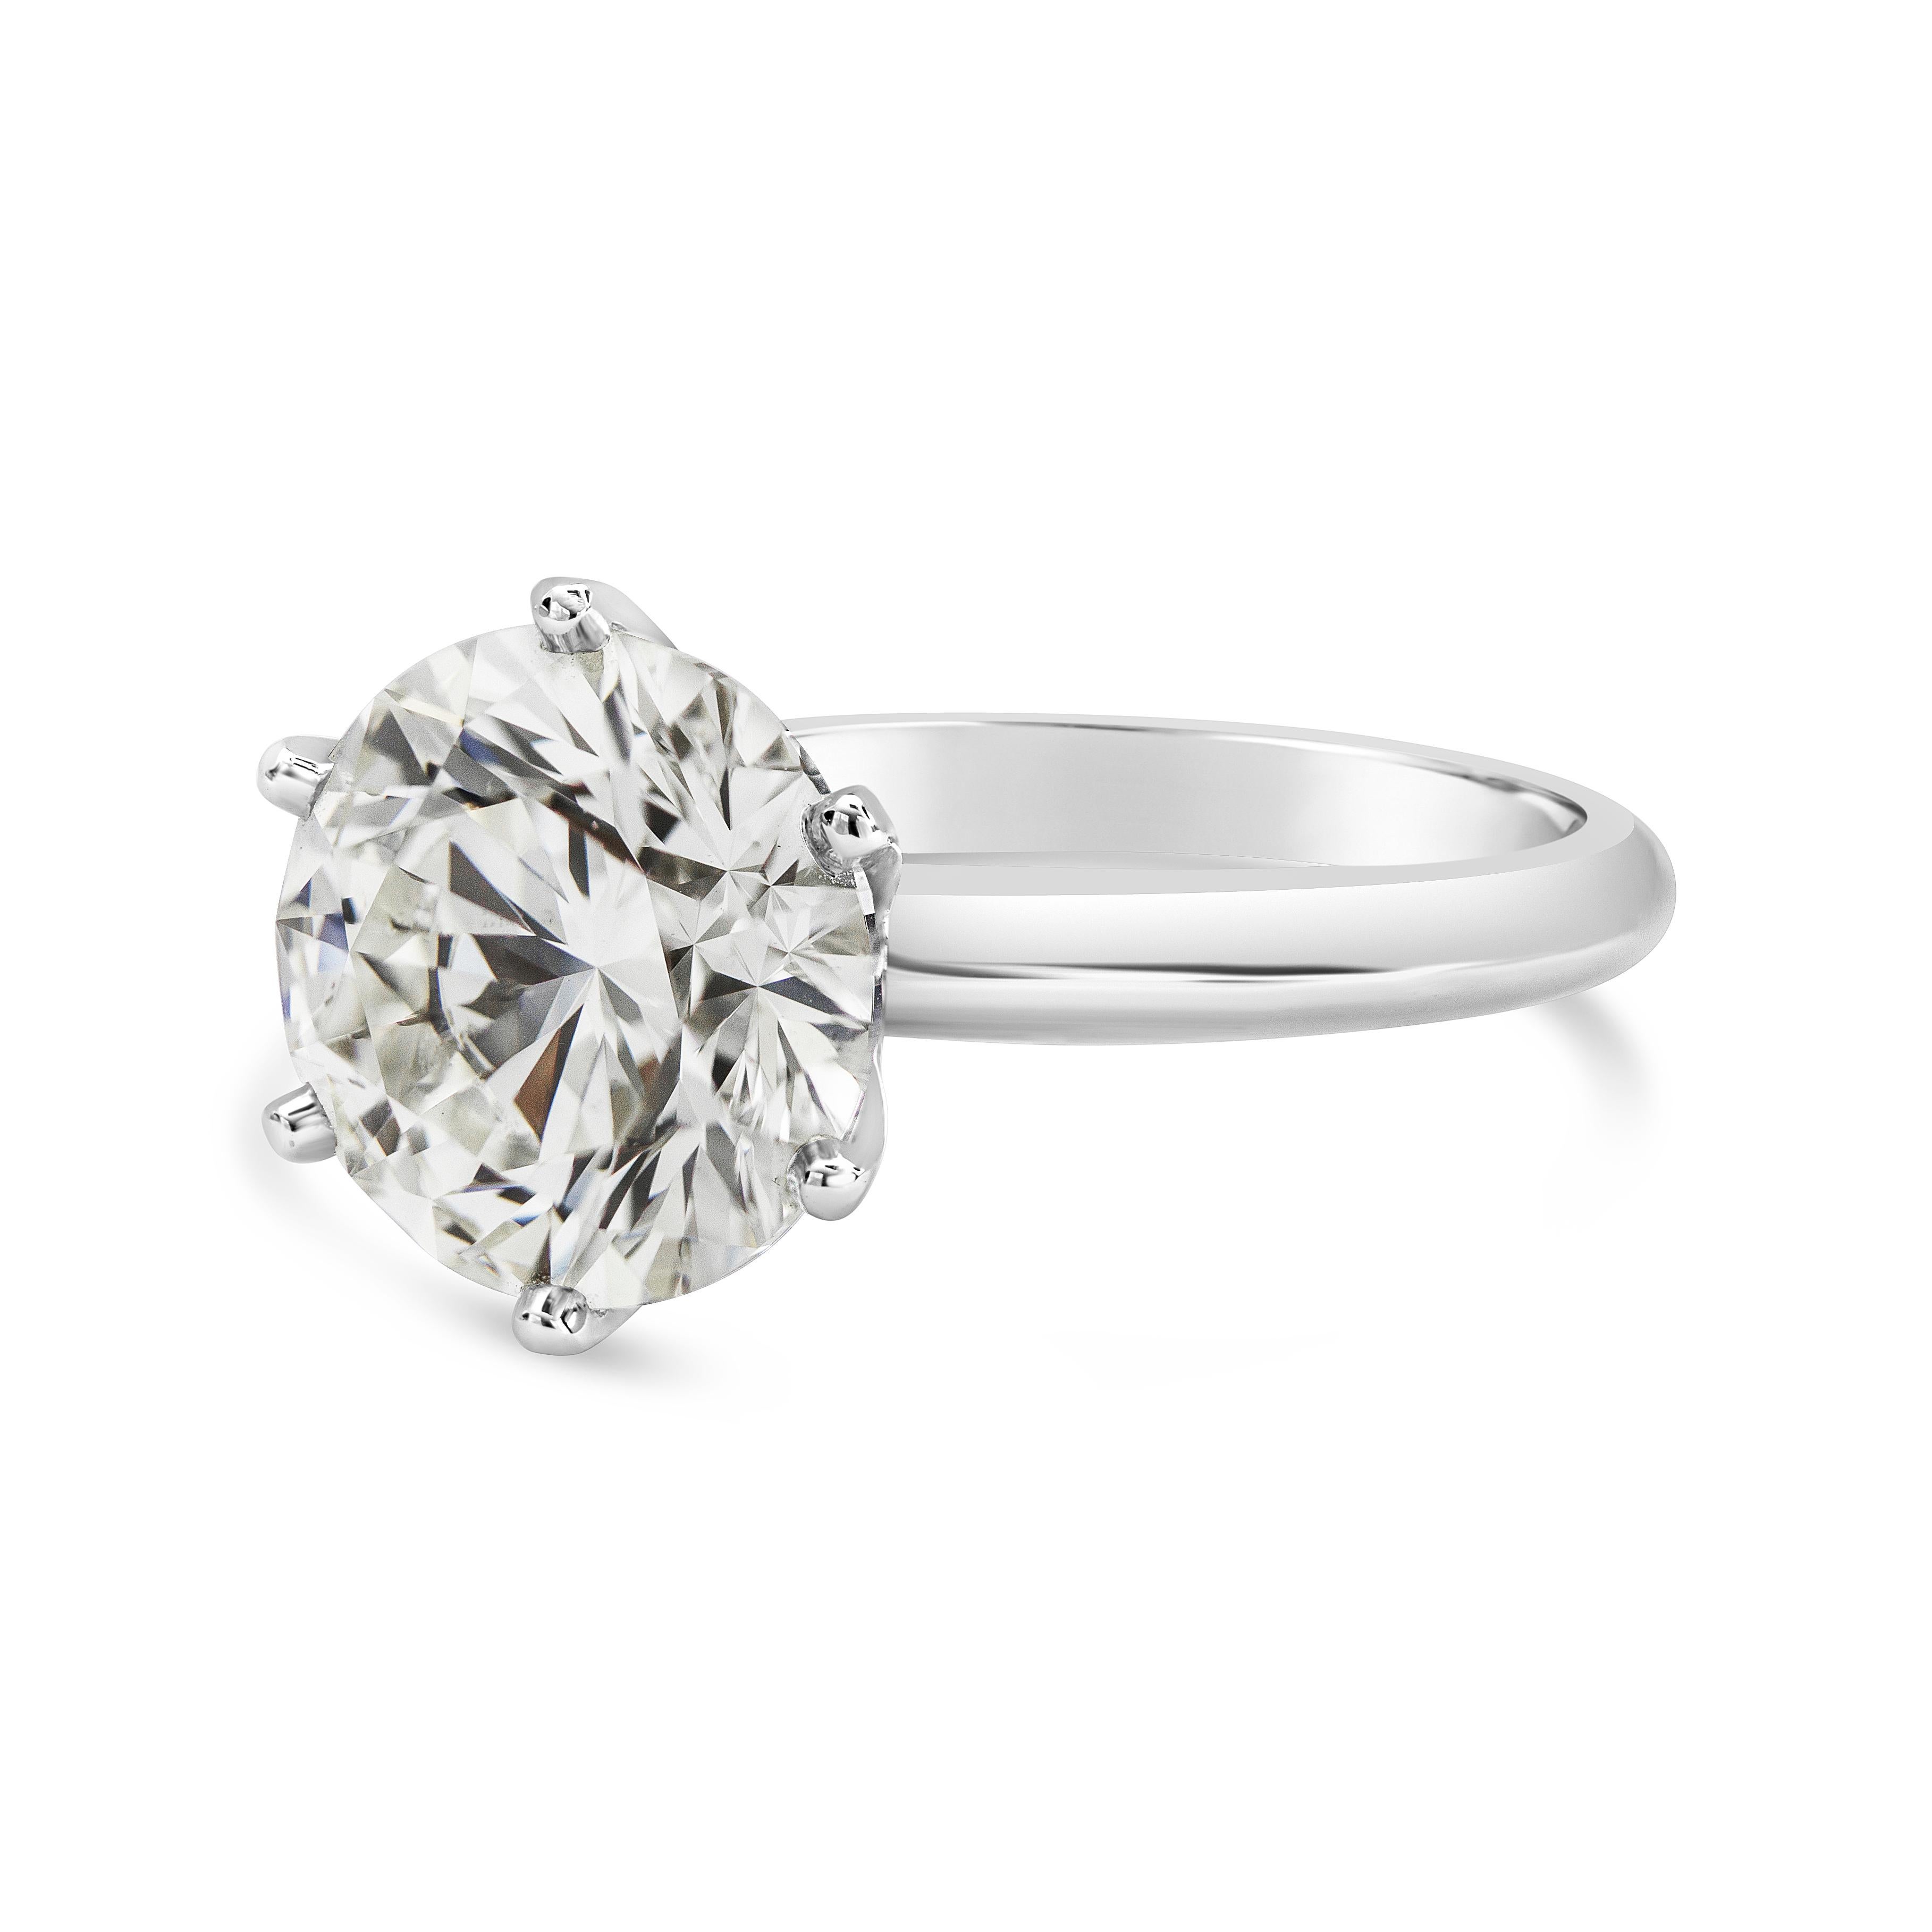 Showcasing a single 5.03 carat round brilliant diamond set in a 6 prong, knife-edge platinum band. GIA certified the diamond as J color, SI1 clarity; Excellent in Cut, Polish, and Symmetry.

Style available in different price ranges. Prices are